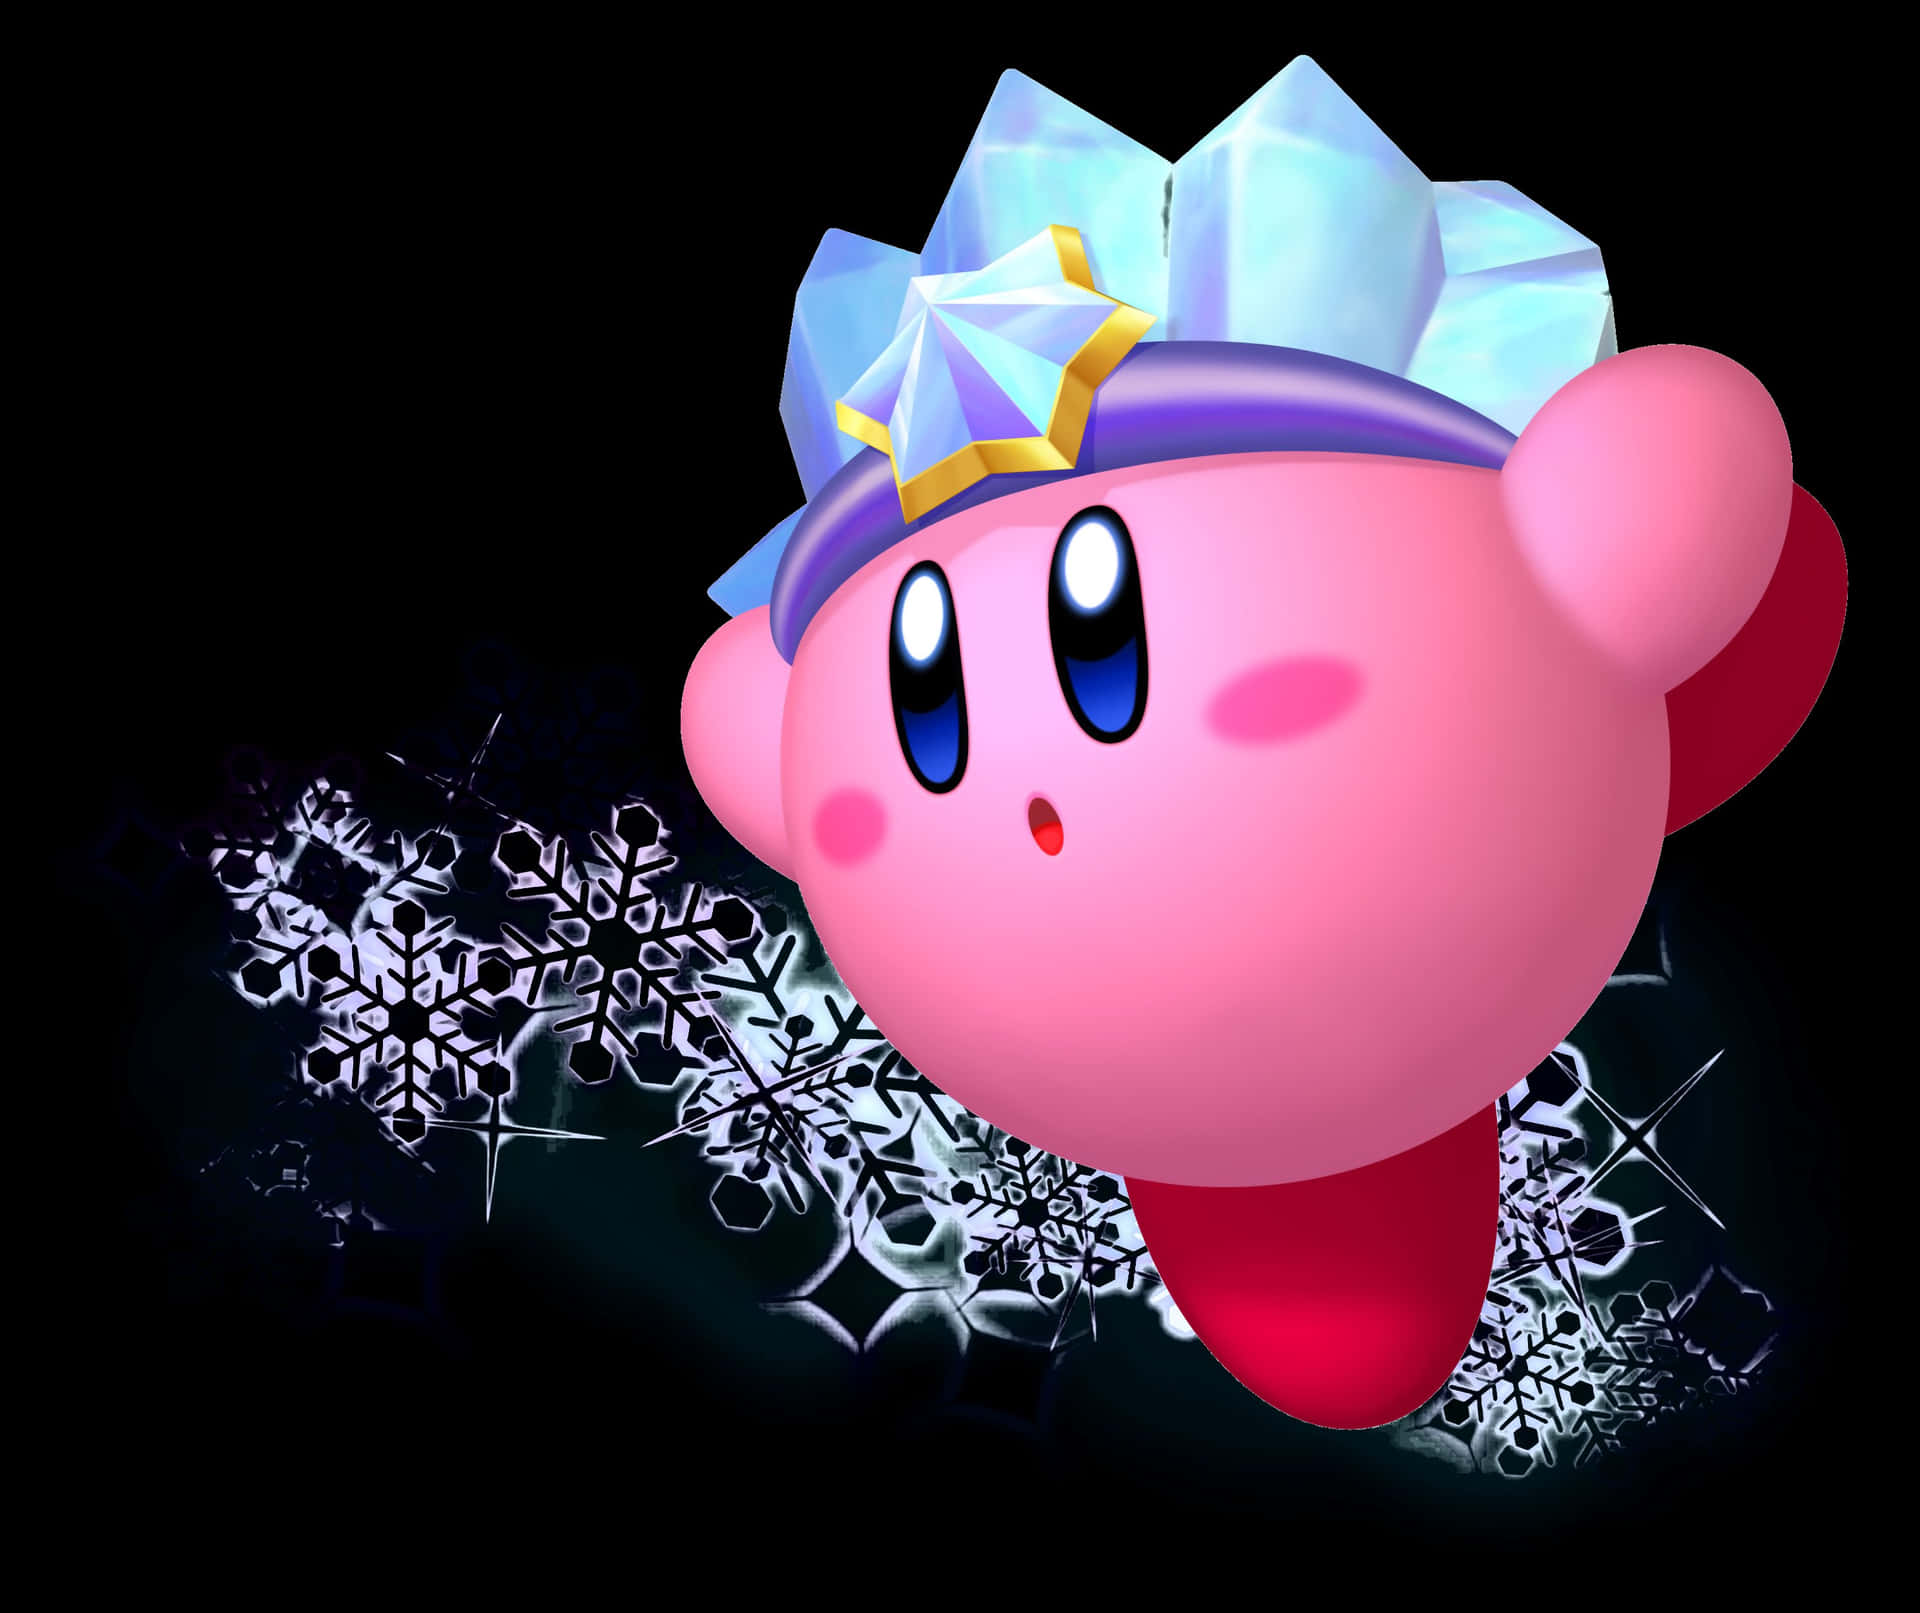 Explore the world of Dream Land with Kirby!